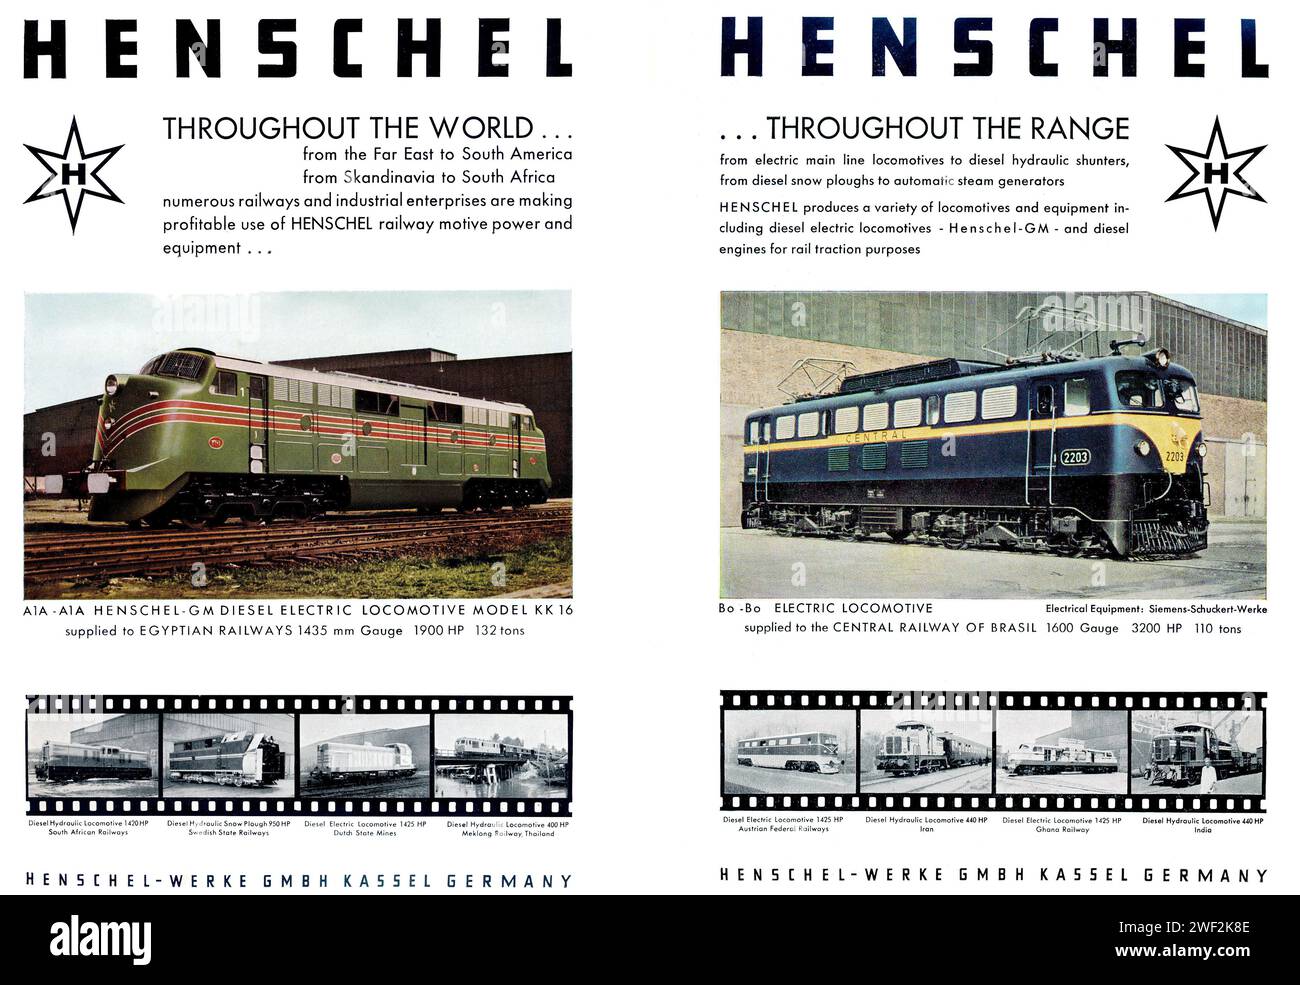 A vintage advert for Henschel diesel locomotives, made in Germany, in World Railways directory 1961 Stock Photo